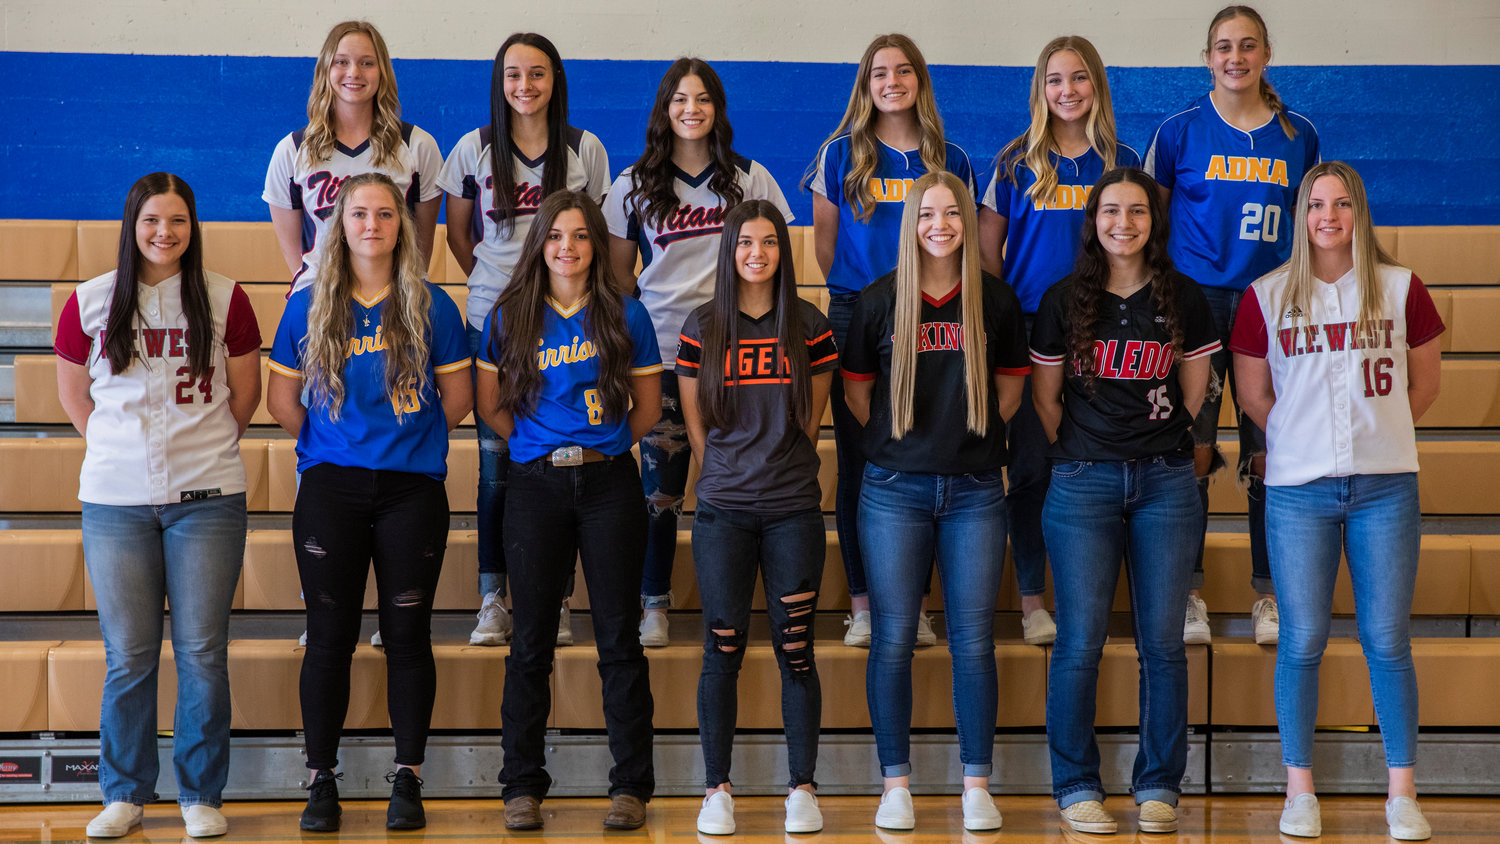 All-area athletes pose for a photo sporting their high school softball jerseys on Thursday, June 9, 2022. All-area picks not pictured are Rainier’s Bailey Elwell, Tenino’s Emily Baxter, and Onalaska’s Alex Cleveland-Barrera.